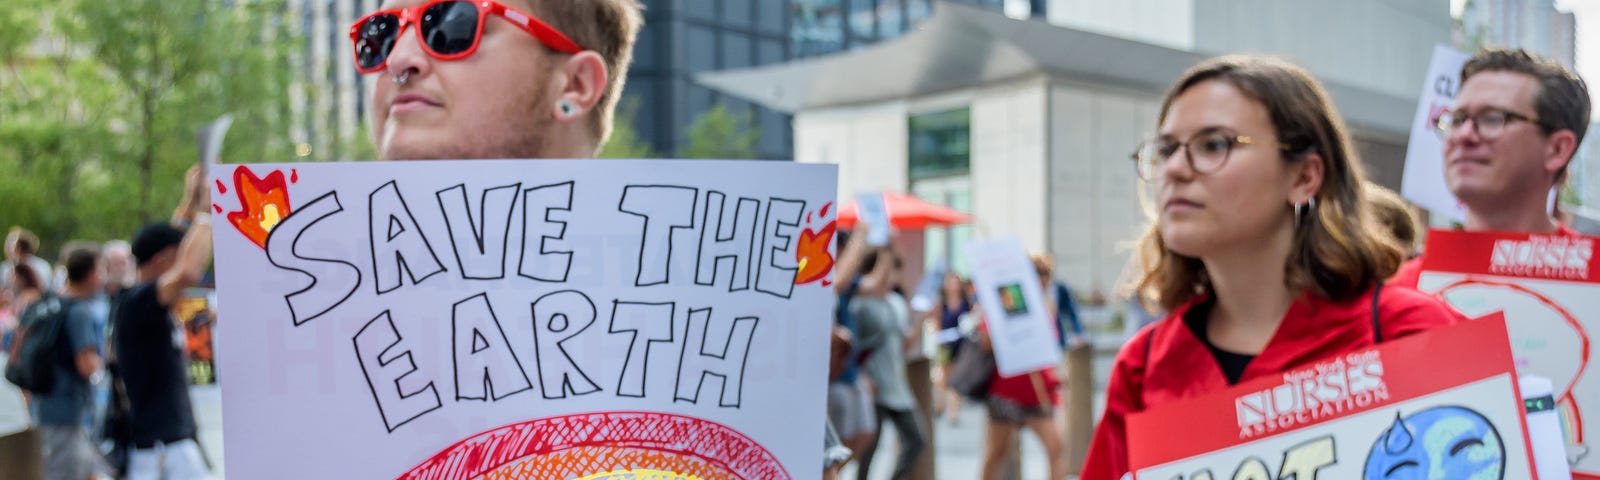 A group of protesters on a city sidewalk carrying signs that say “save the earth” and “hot earth summer”